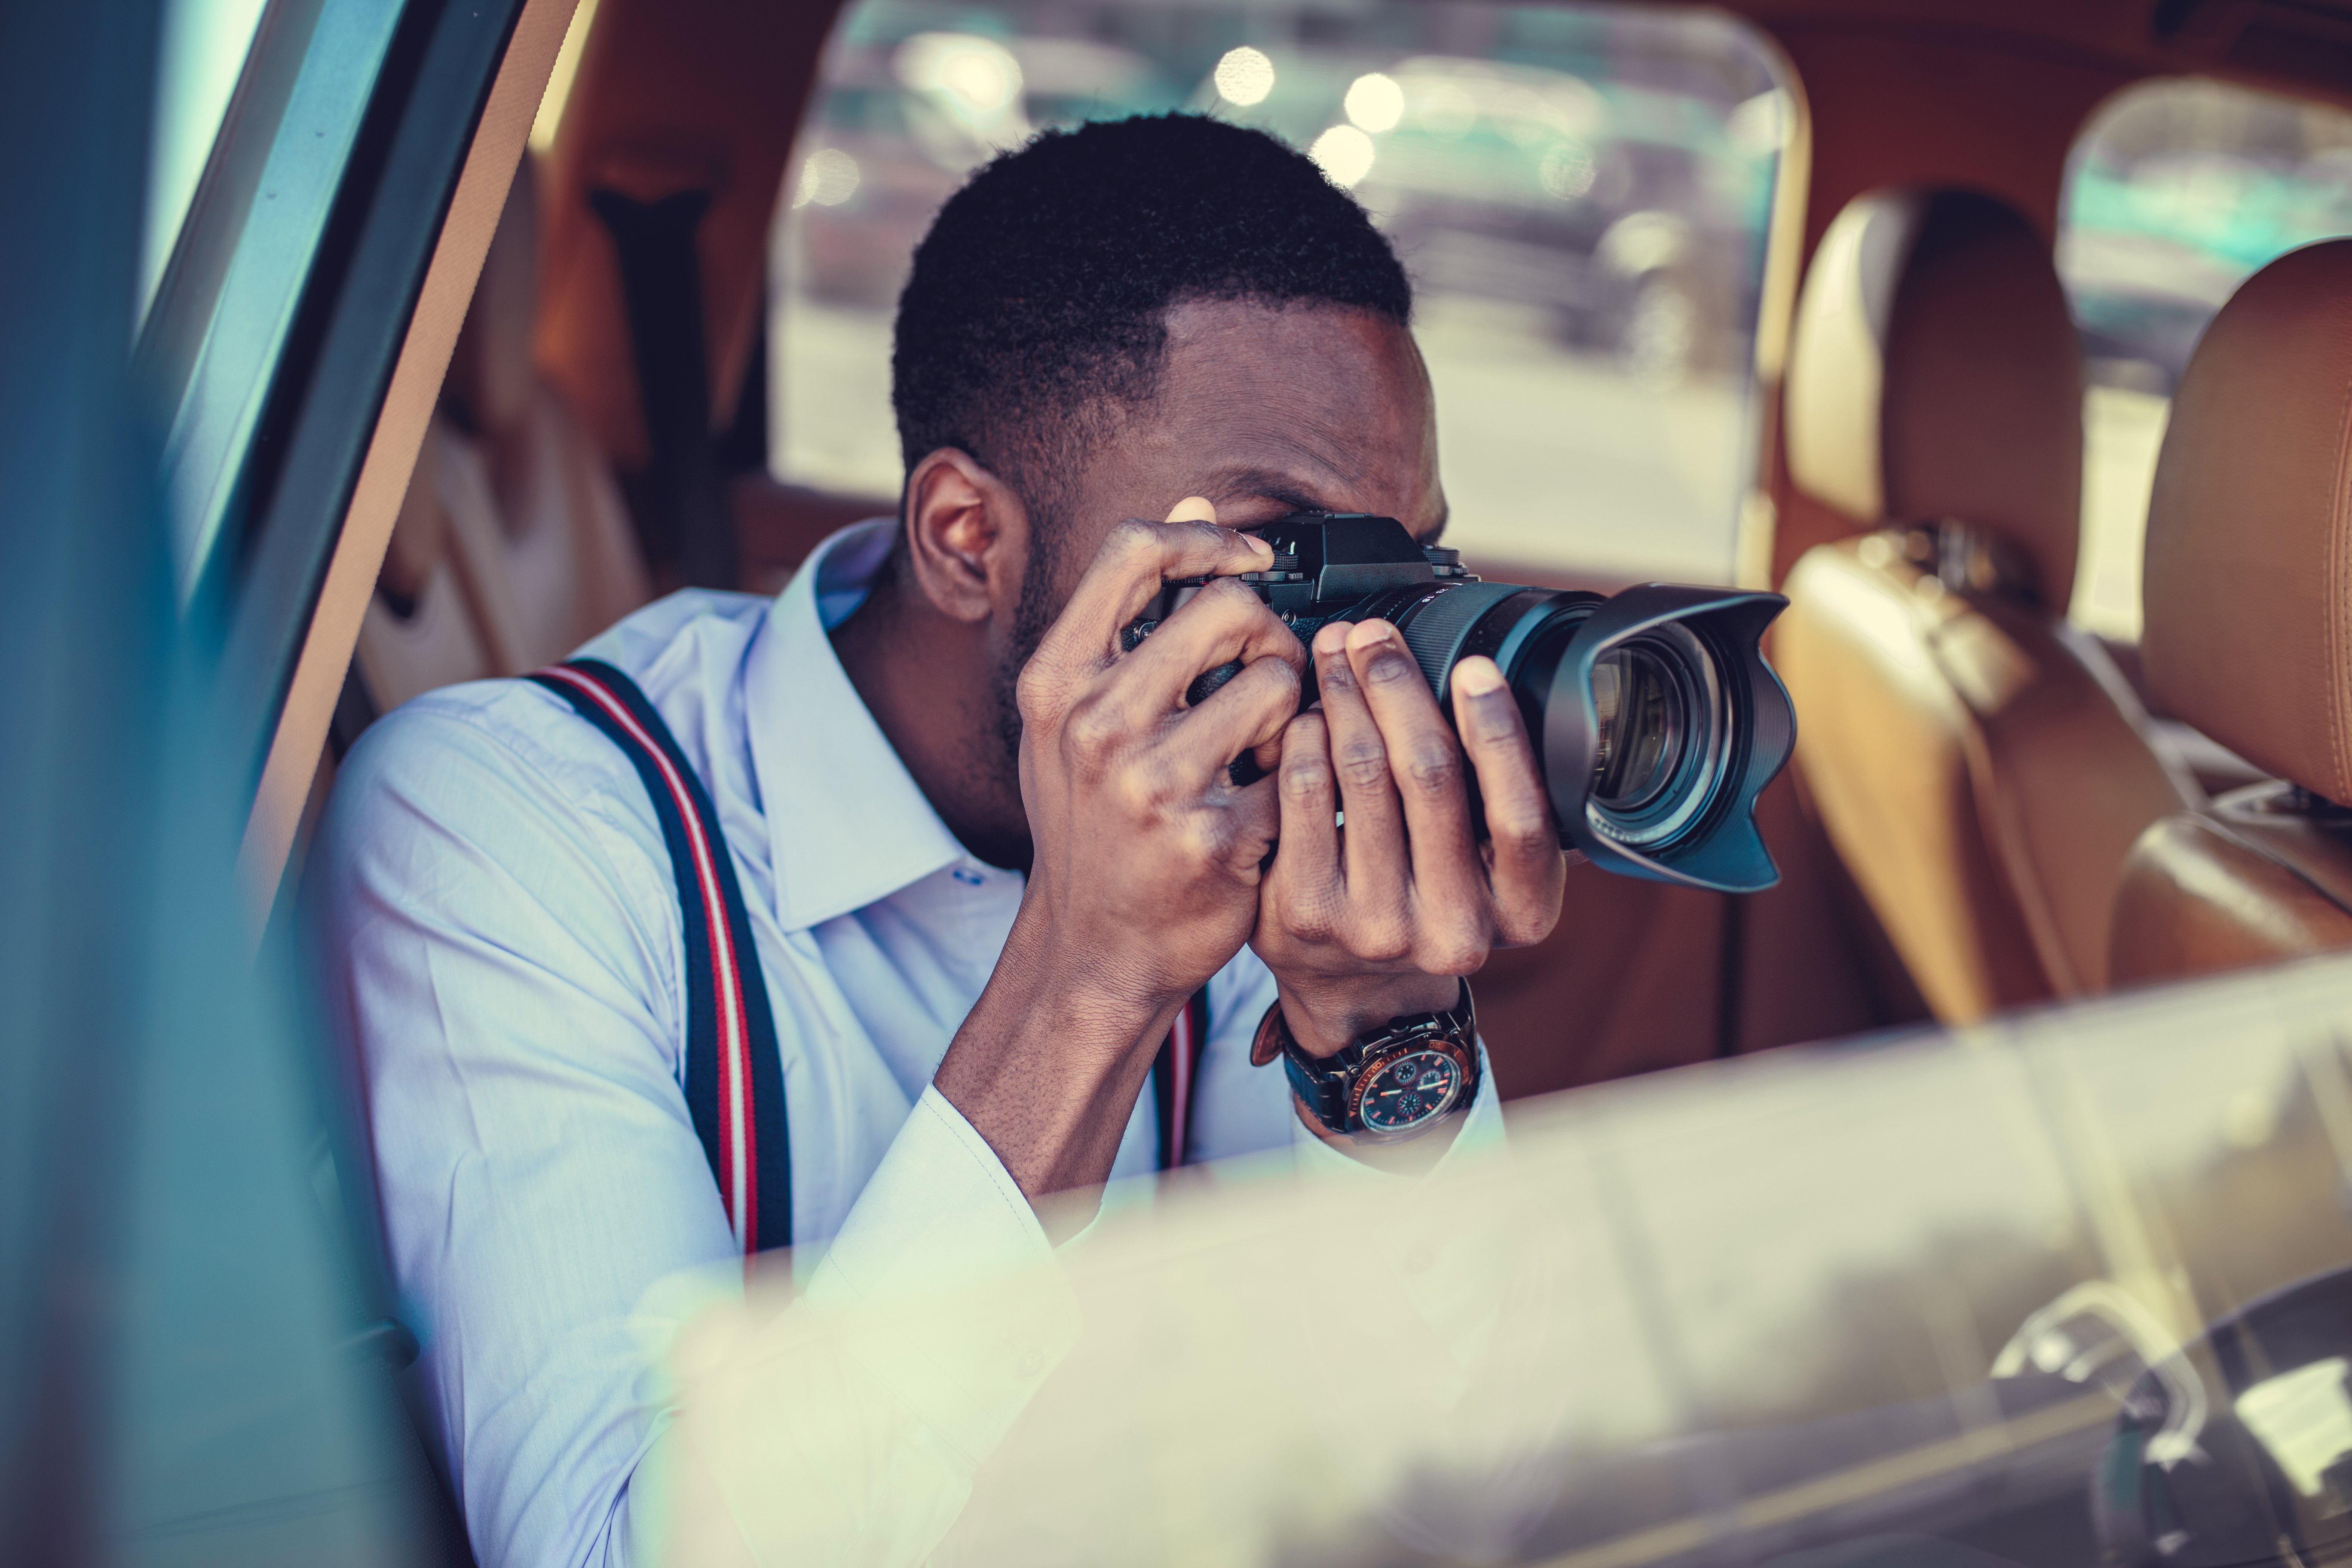 Man sitting in a car taking a picture through an open window